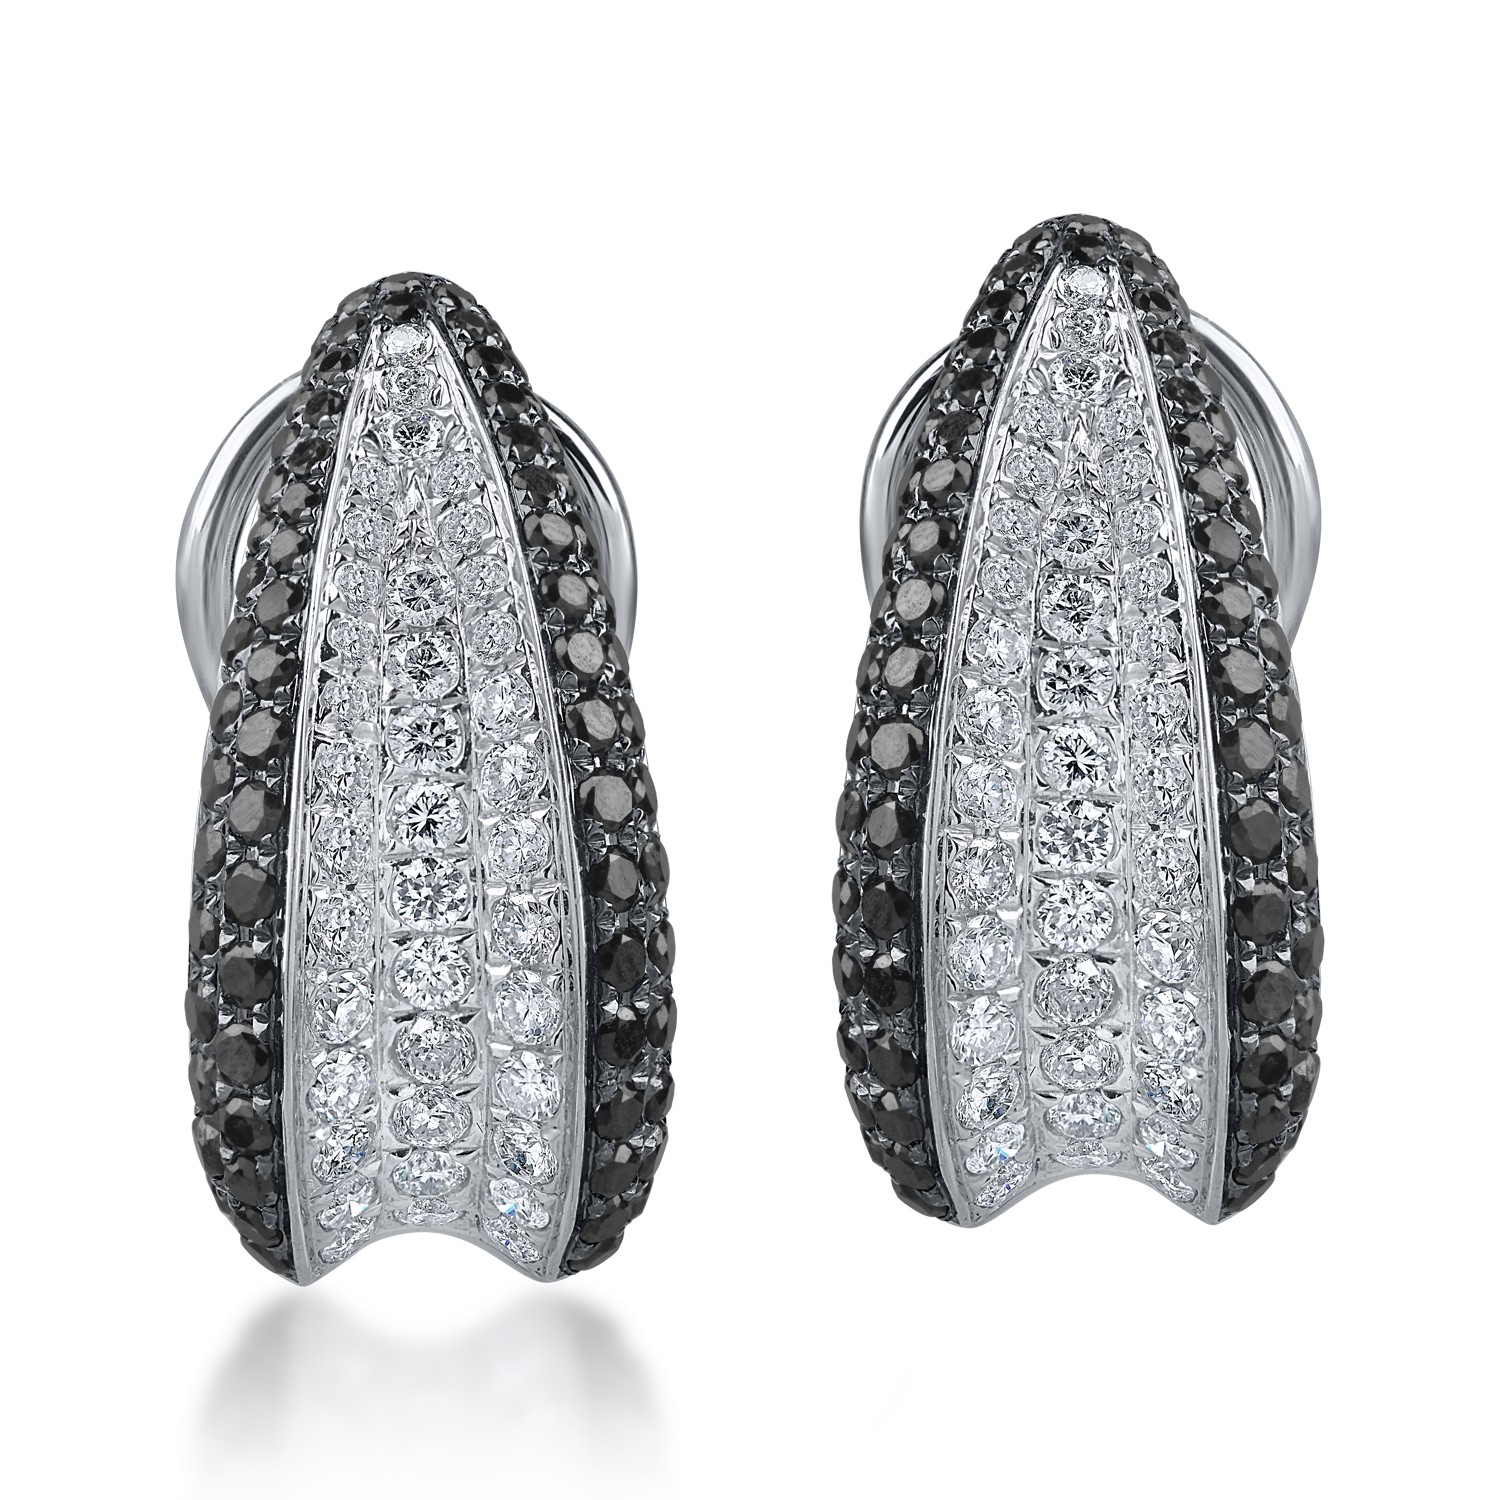 White gold on ear earrings with 0.8ct clear diamonds and 1ct black diamonds